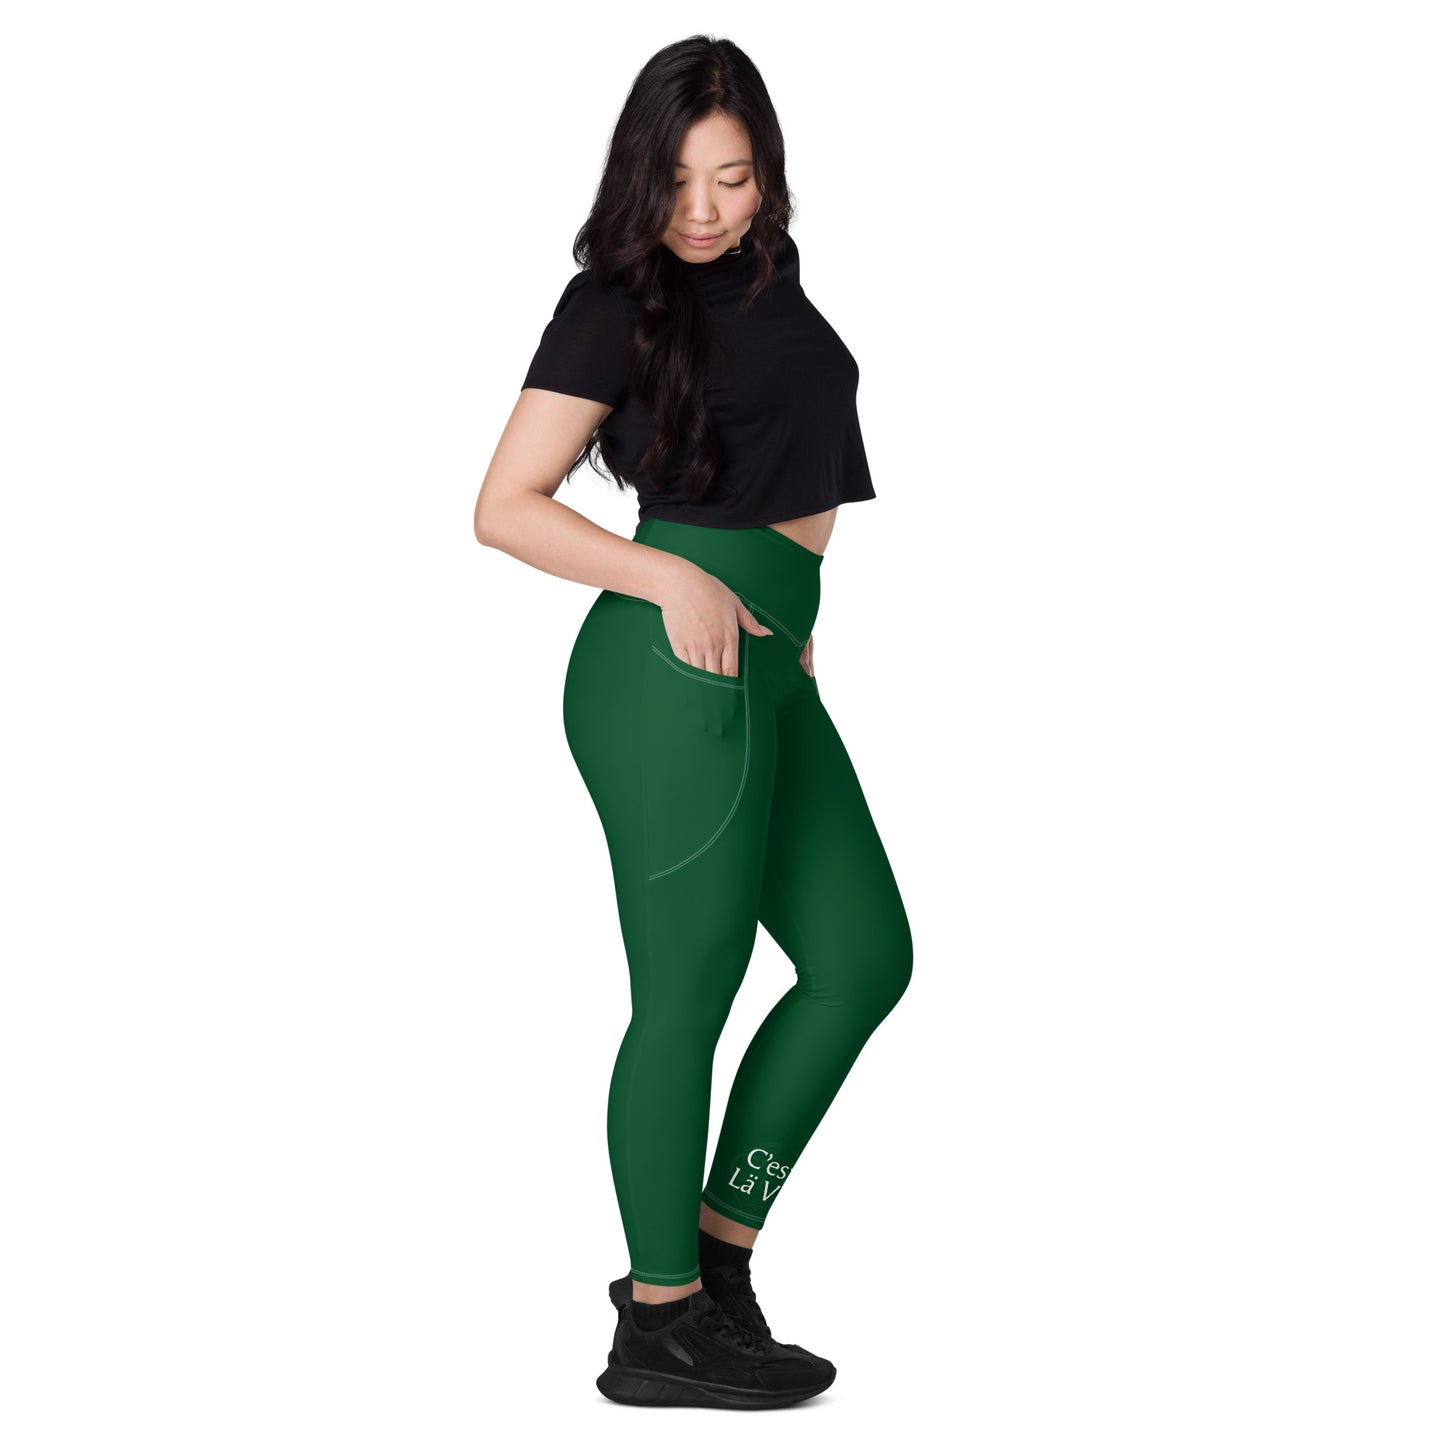 CLV Green Recycled Leggings with Pockets